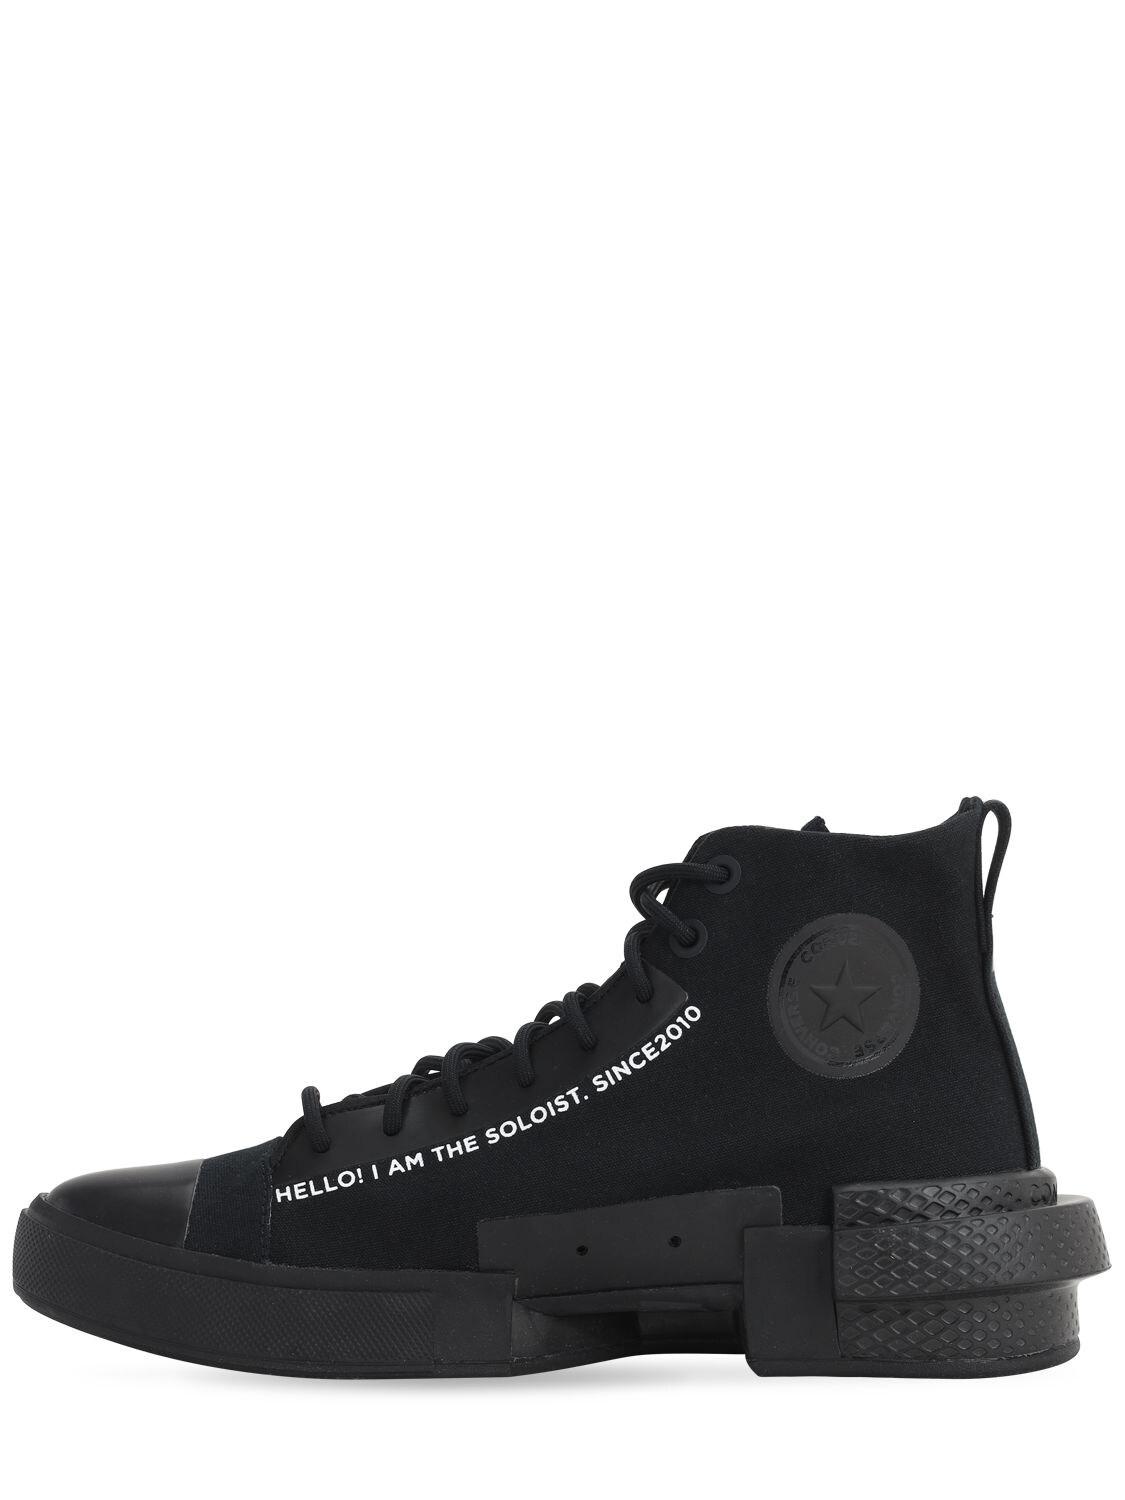 Converse The Soloist All Star Disrupt Cx Sneakers in Black for Men | Lyst